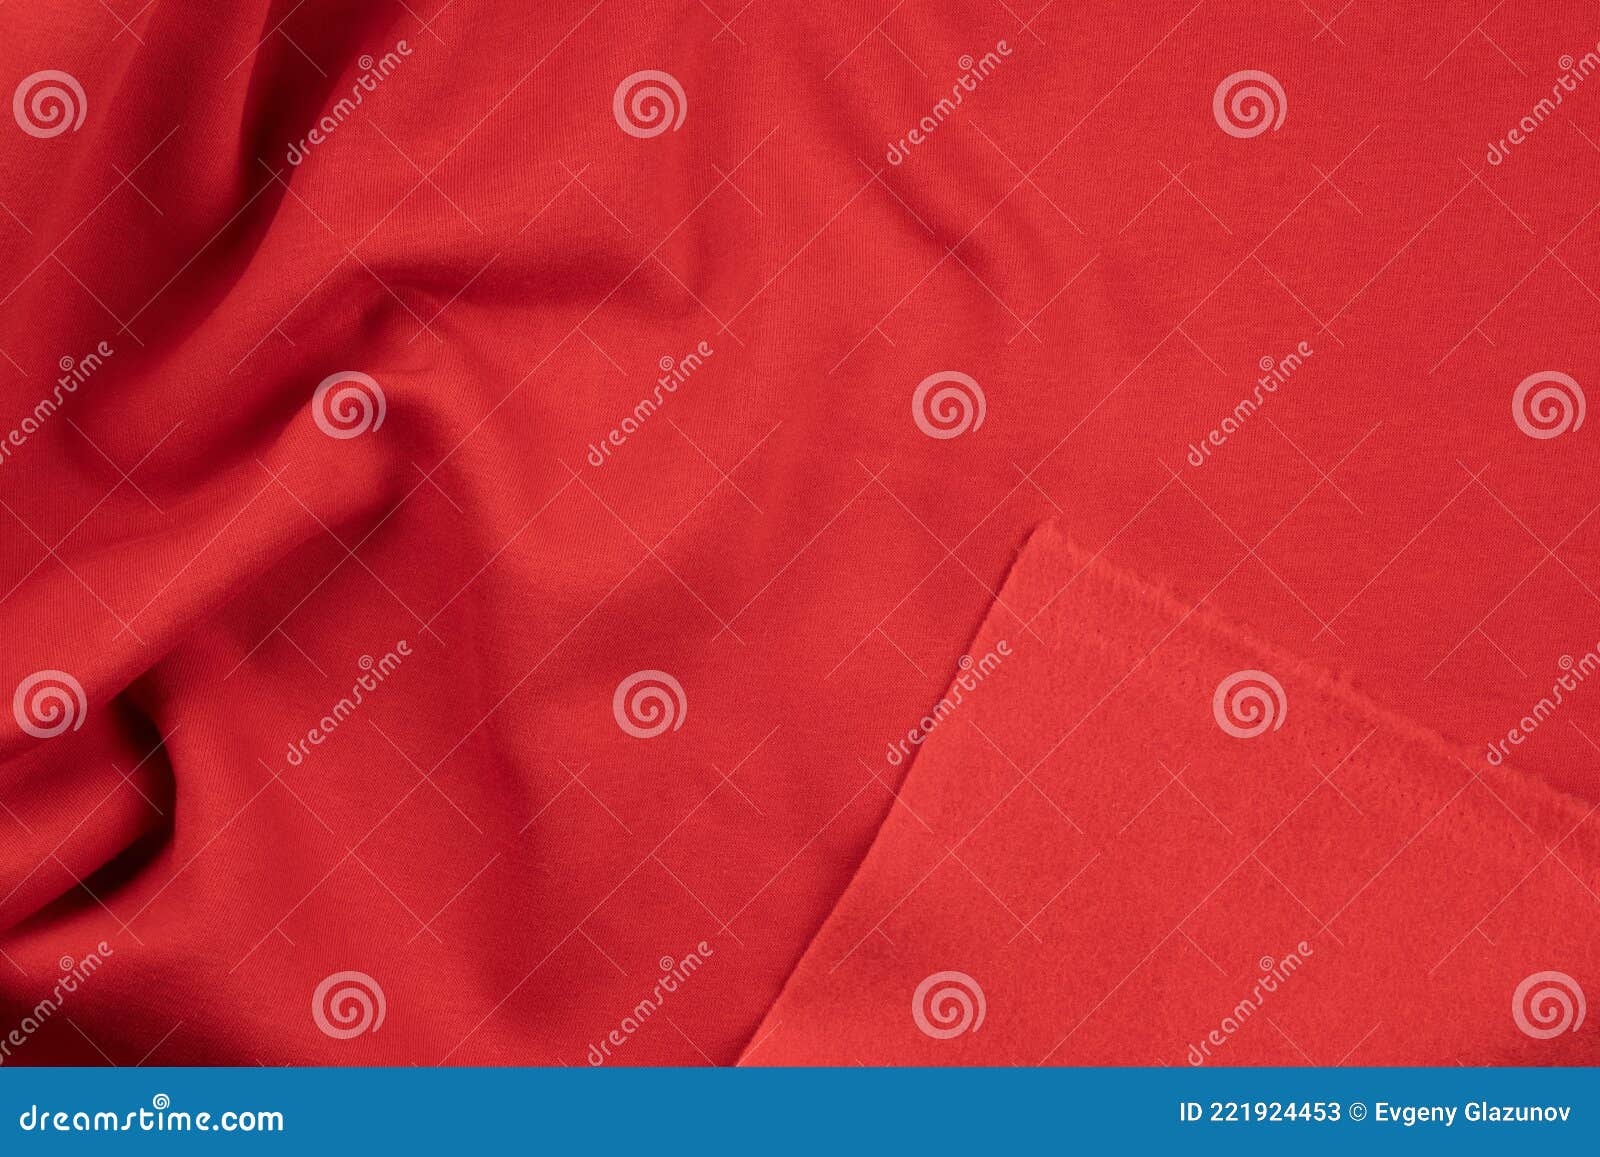 Background from Red Monochrome Cotton Fabric. Close Up Texture Stock ...